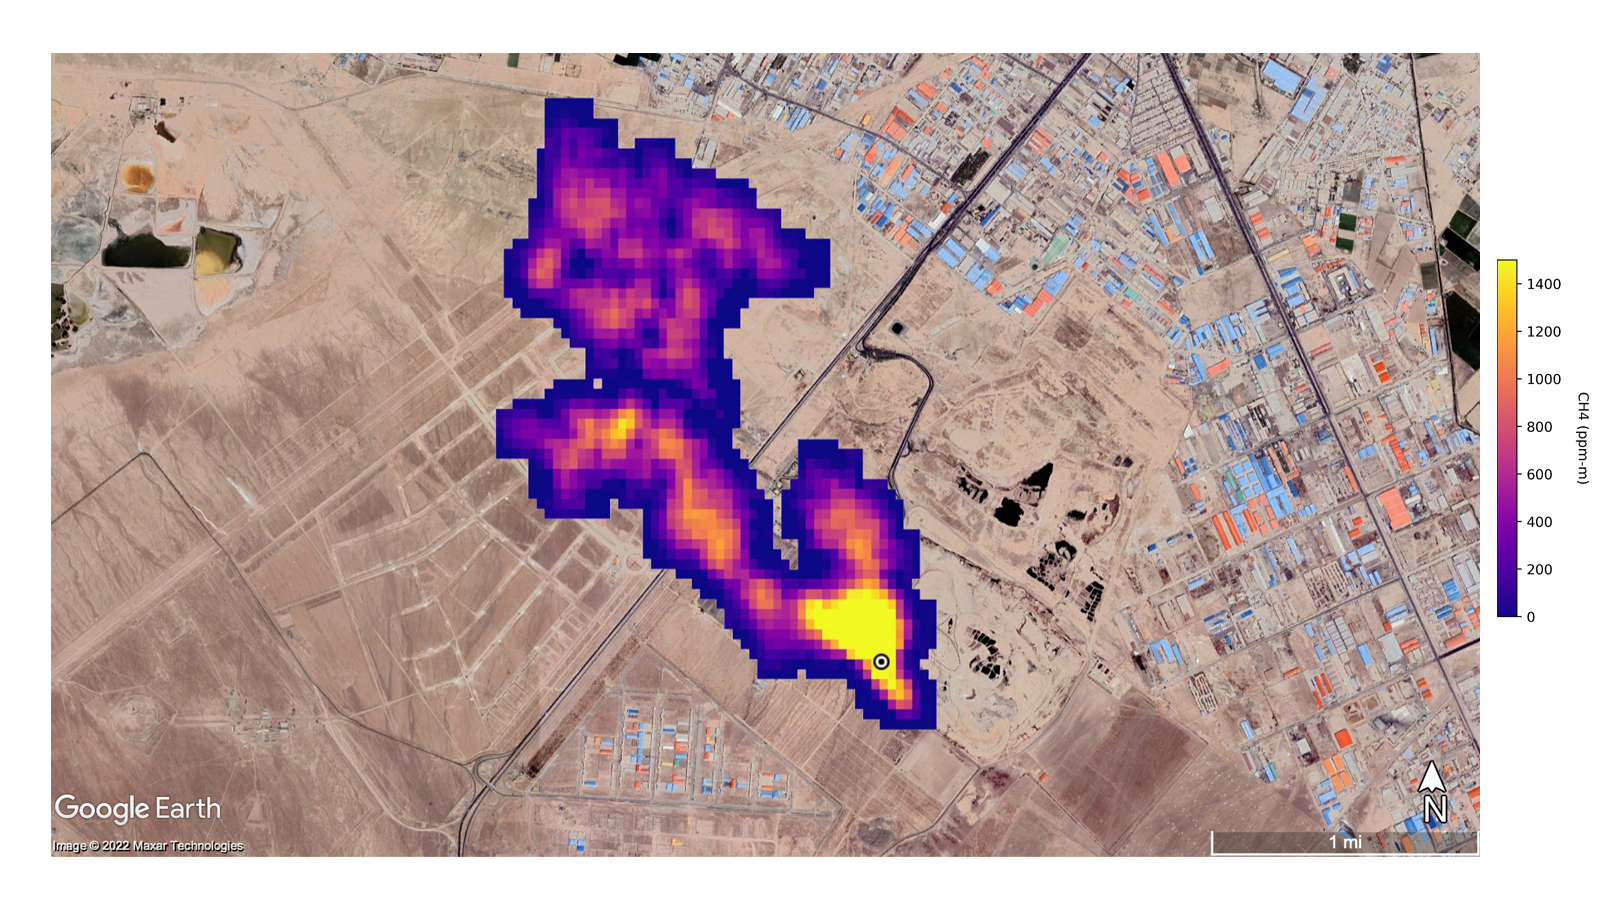 A methane plume at least 3 miles (4.8 kilometers) long billows into the atmosphere south of Tehran, Iran. The plume, detected by NASA’s Earth Surface Mineral Dust Source Investigation mission, comes from a major landfill, where methane is a byproduct of decomposition.